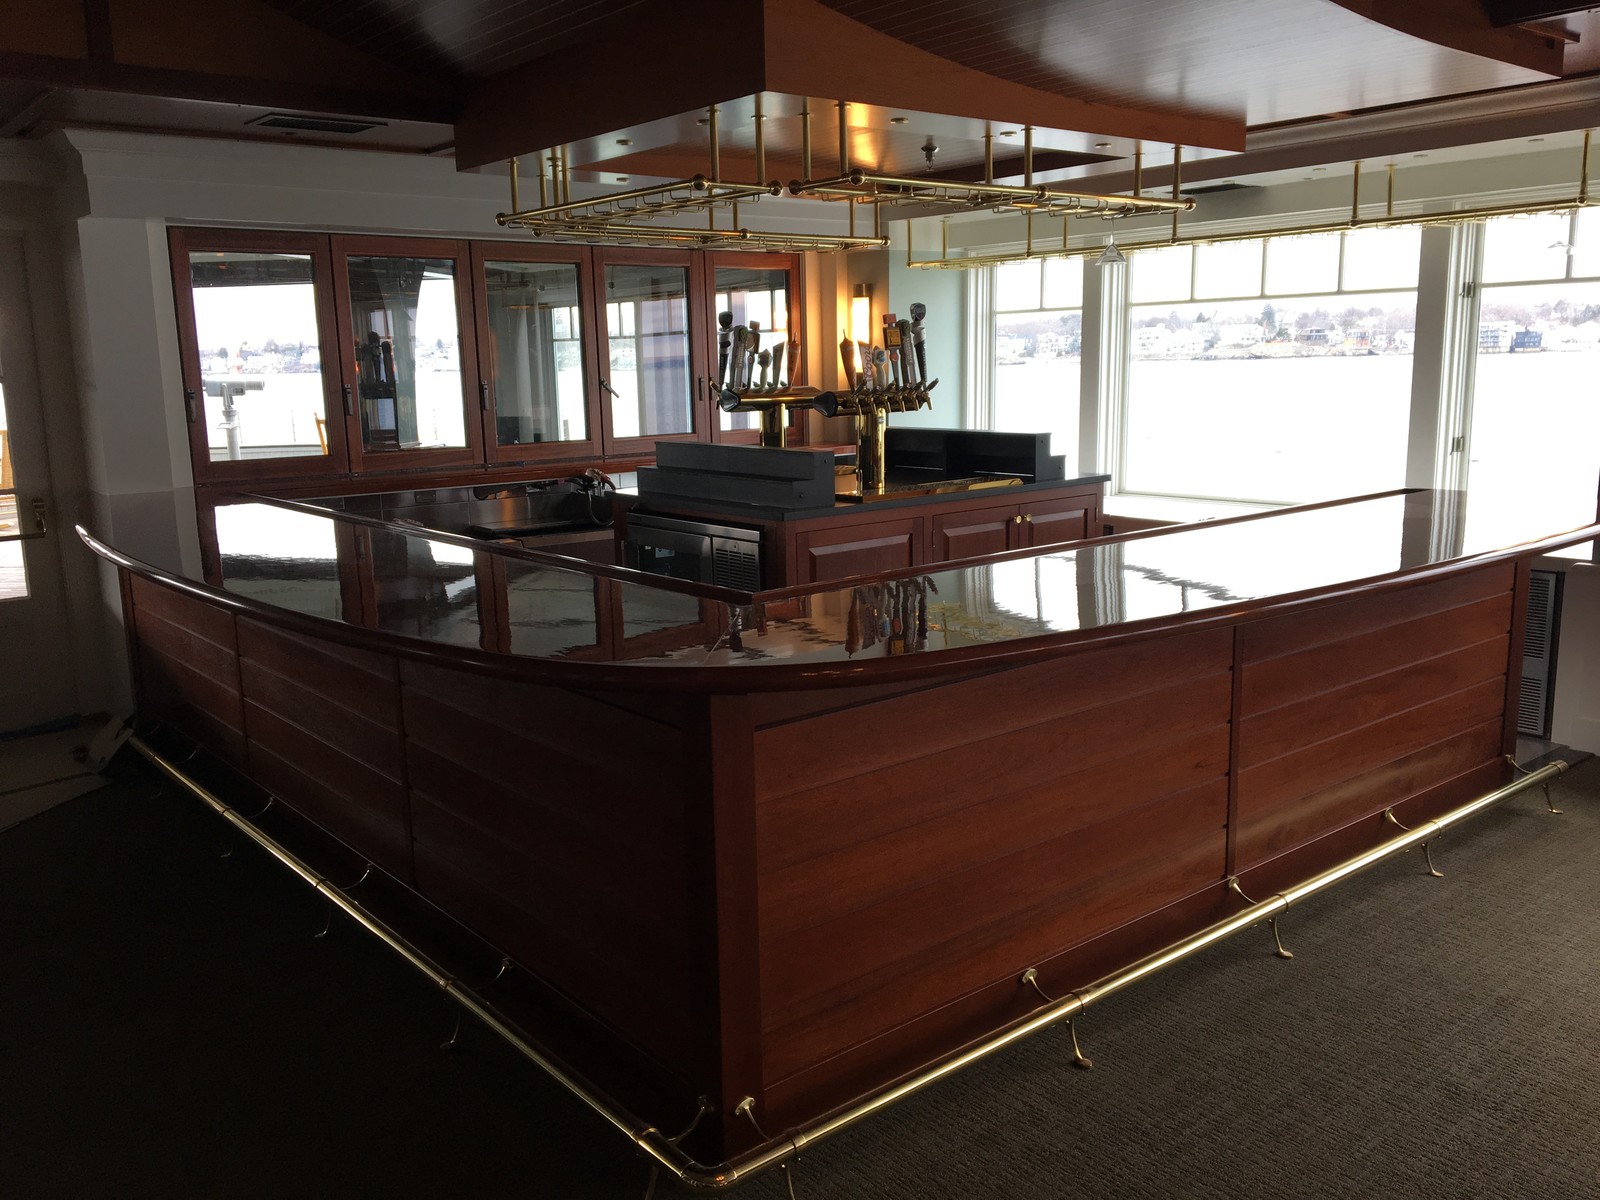 Another view of this custom mahogany bar and ceiling